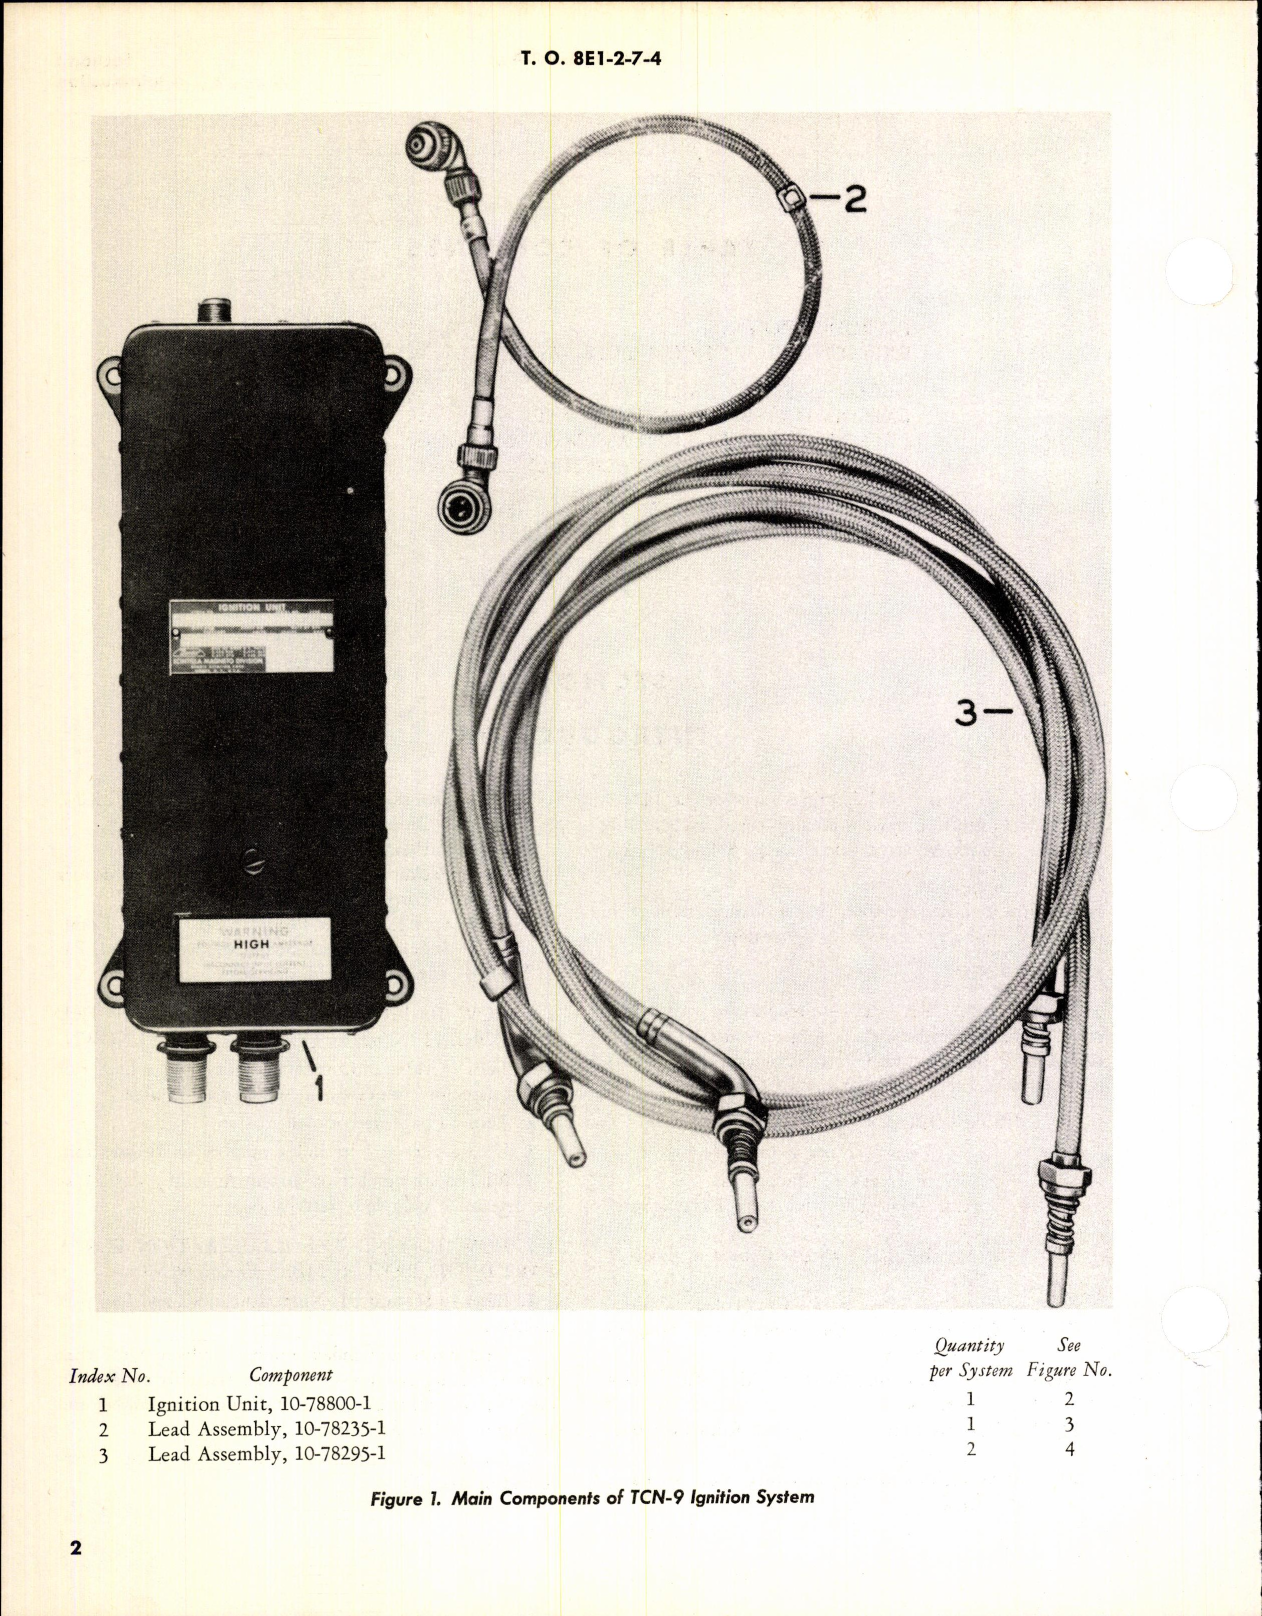 Sample page 4 from AirCorps Library document: Illustrated Parts Breakdown for Ignition System Model TCN-9